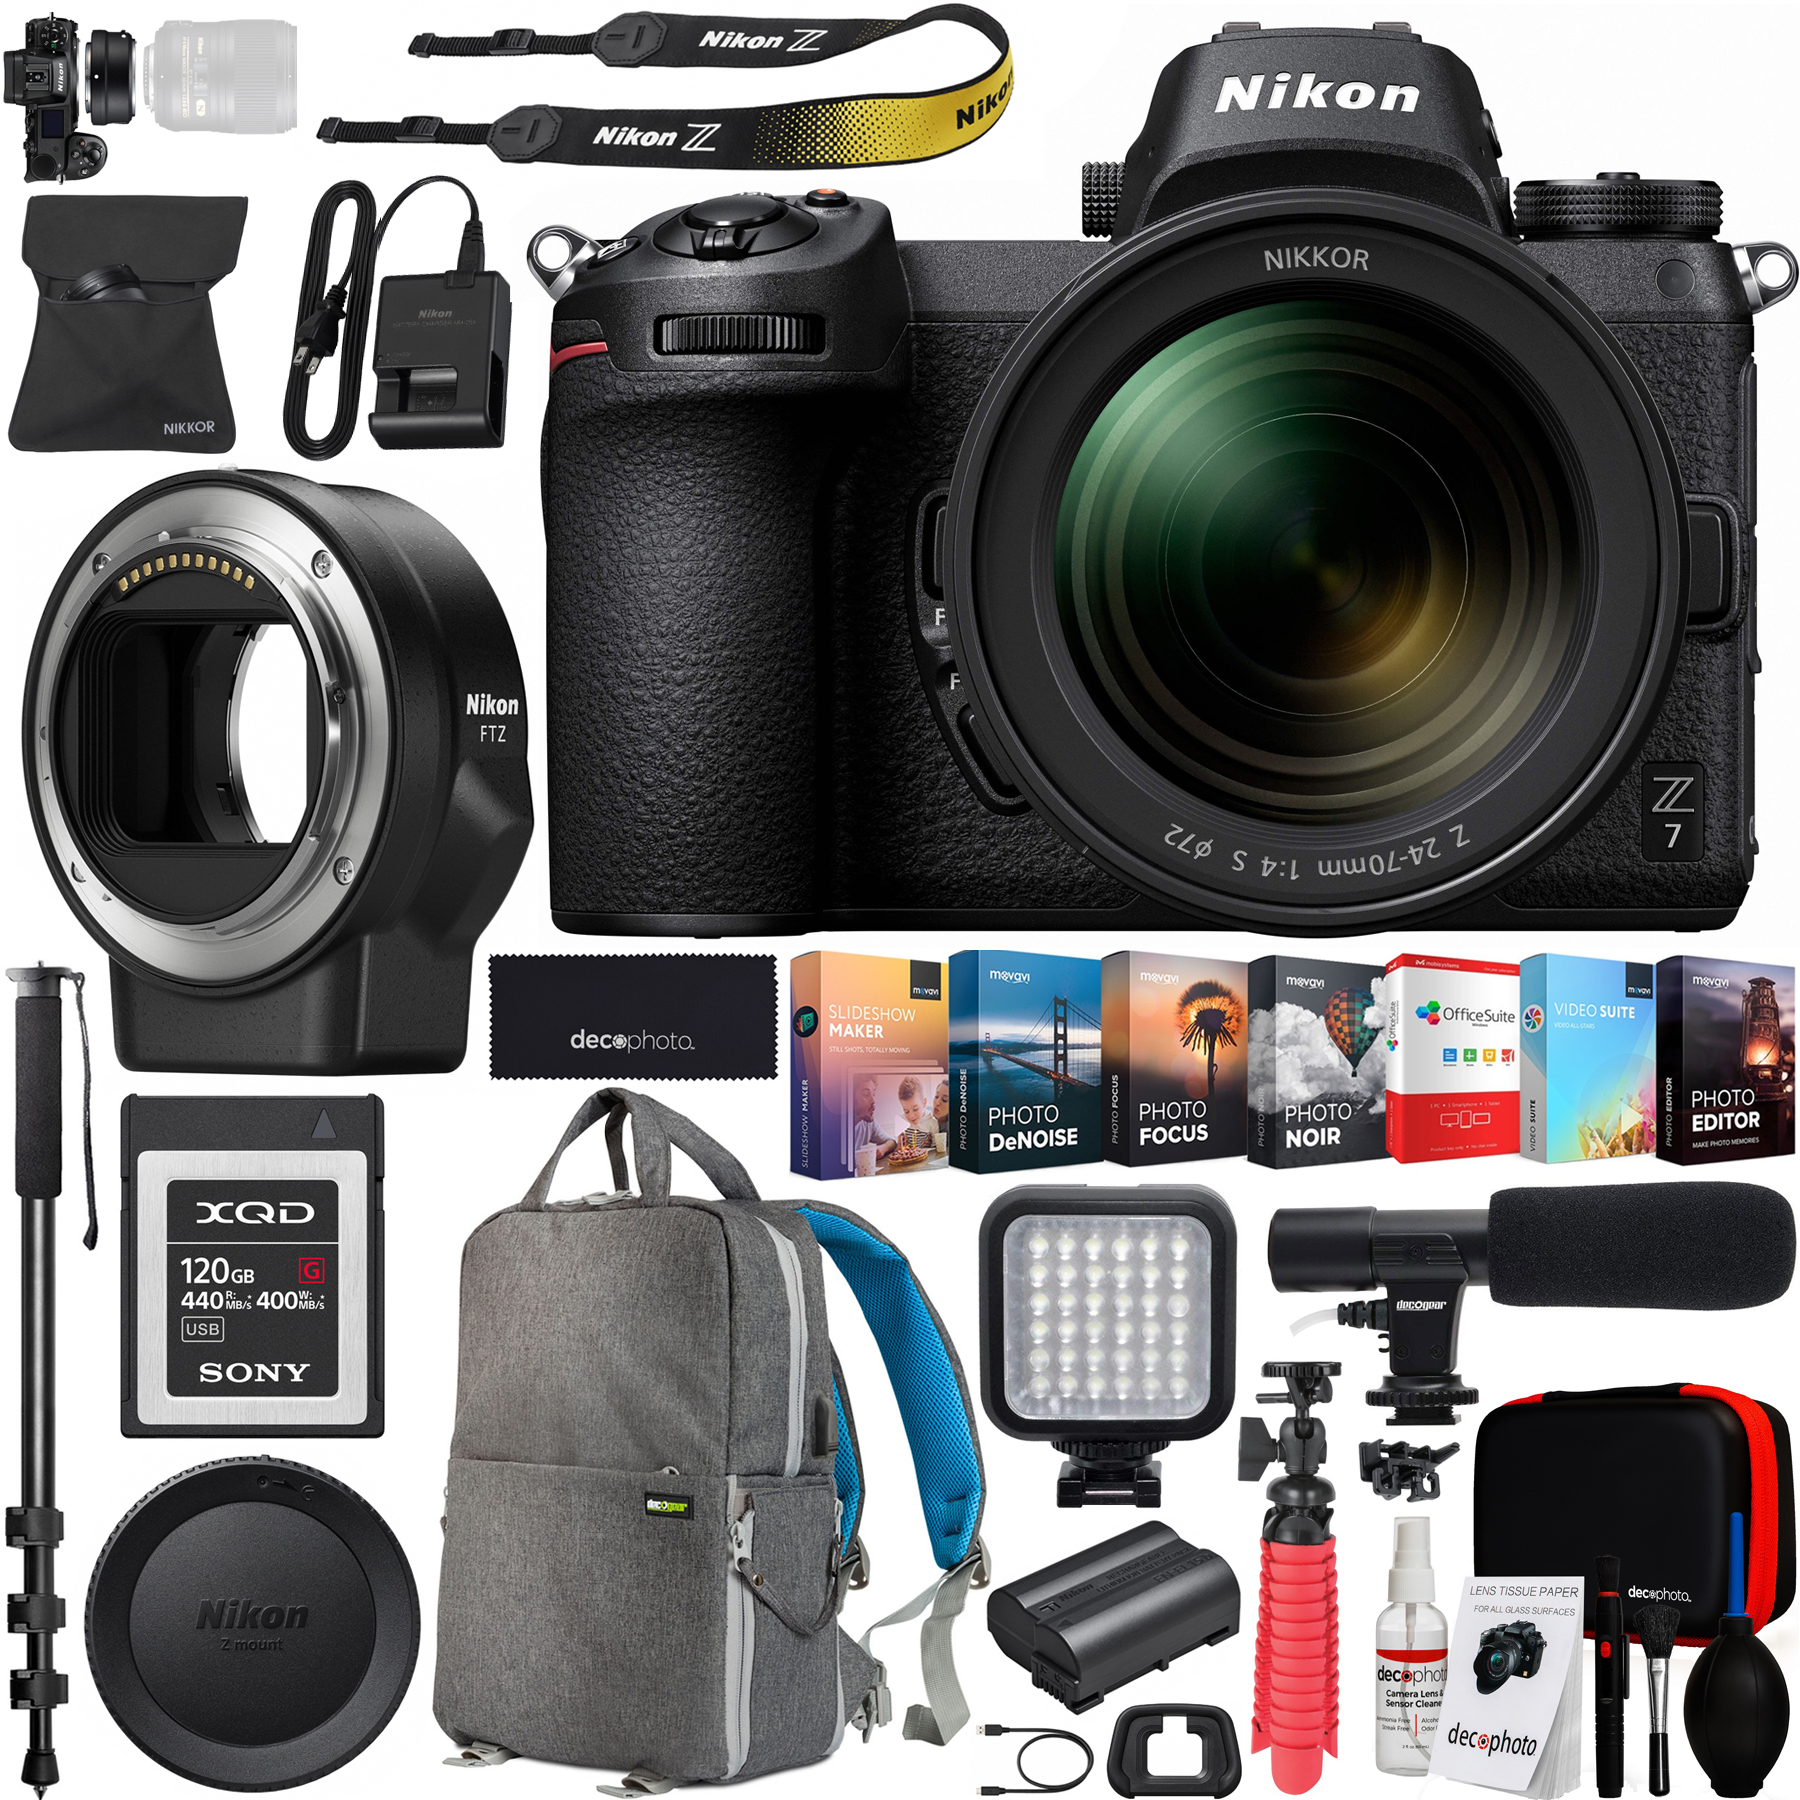 Nikon Z7 Mirrorless FX-Format Full-Frame 4K Ultra HD Camera Body (1594) with NIKKOR Z 24-70mm f/4 S Lens Kit + FTZ Mount Adapter for F-mount and 120GB Memory Card Deco Gear Backpack Microphone Bundle - image 1 of 10